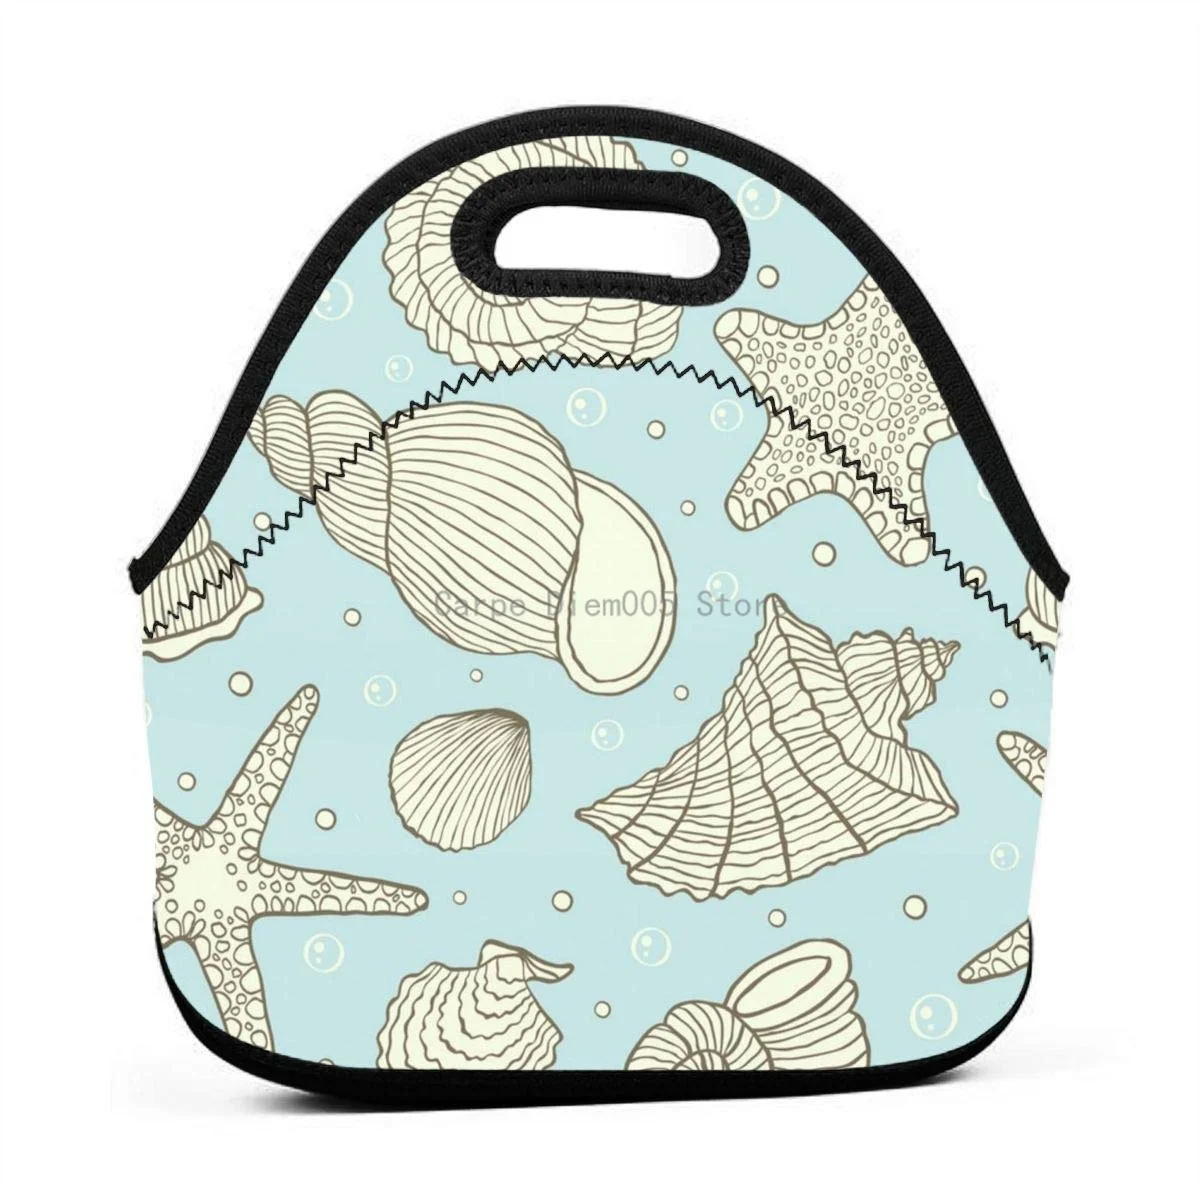 

Marine Snail Scallop Seahorse Starfish Neoprene Lunch Bags Insulated Tote Bag Box for Men Women Office Work Picnic Travel